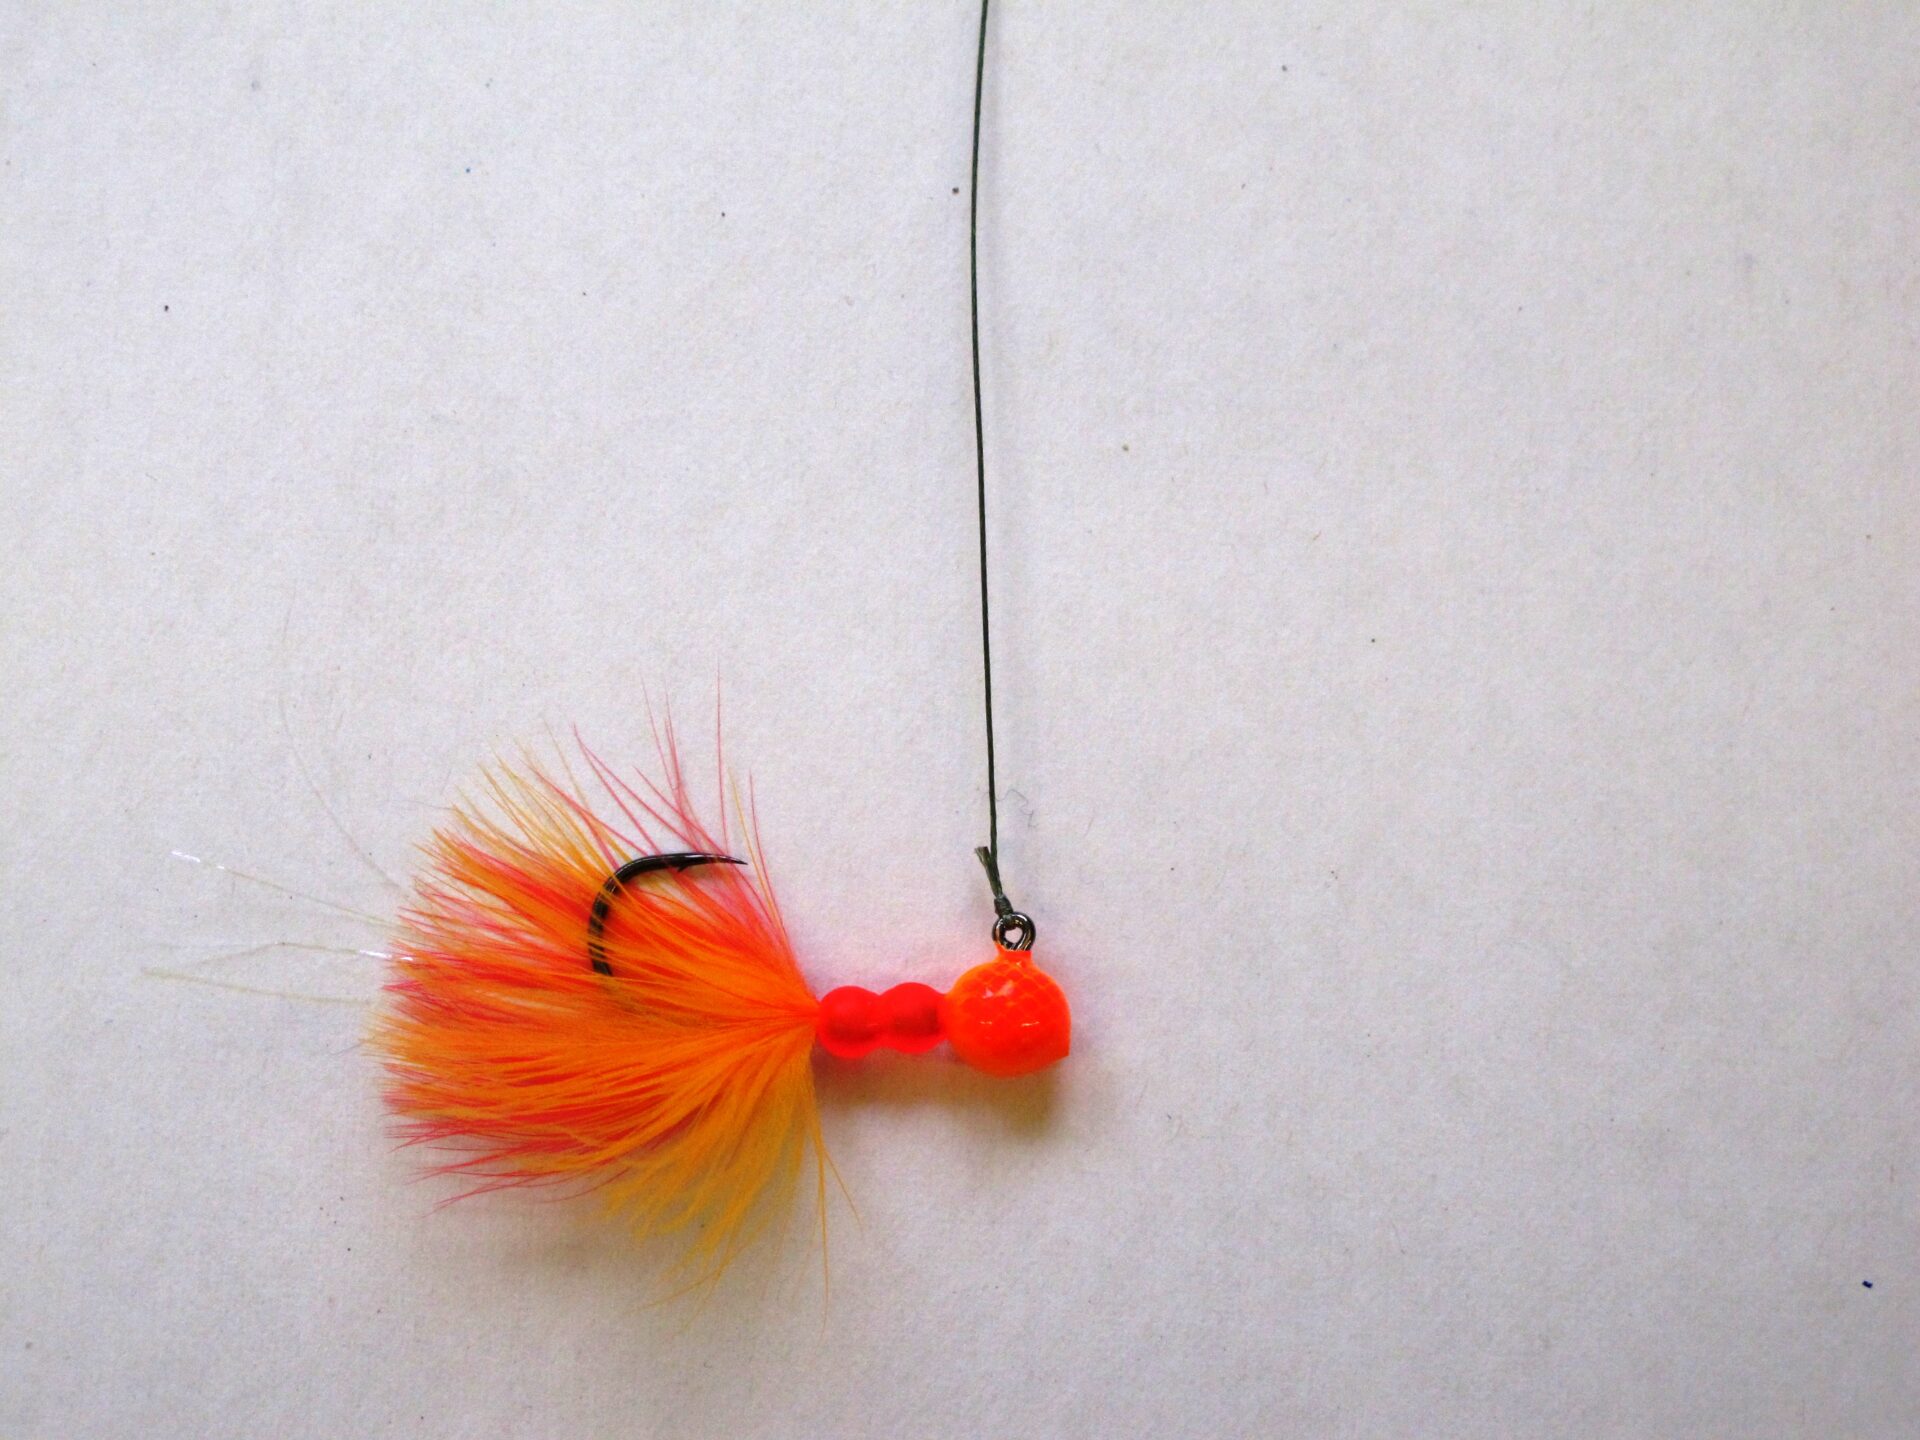 Bobcat Hollow Fly Fishing/Tying: Jig and Pig for Fly Rods